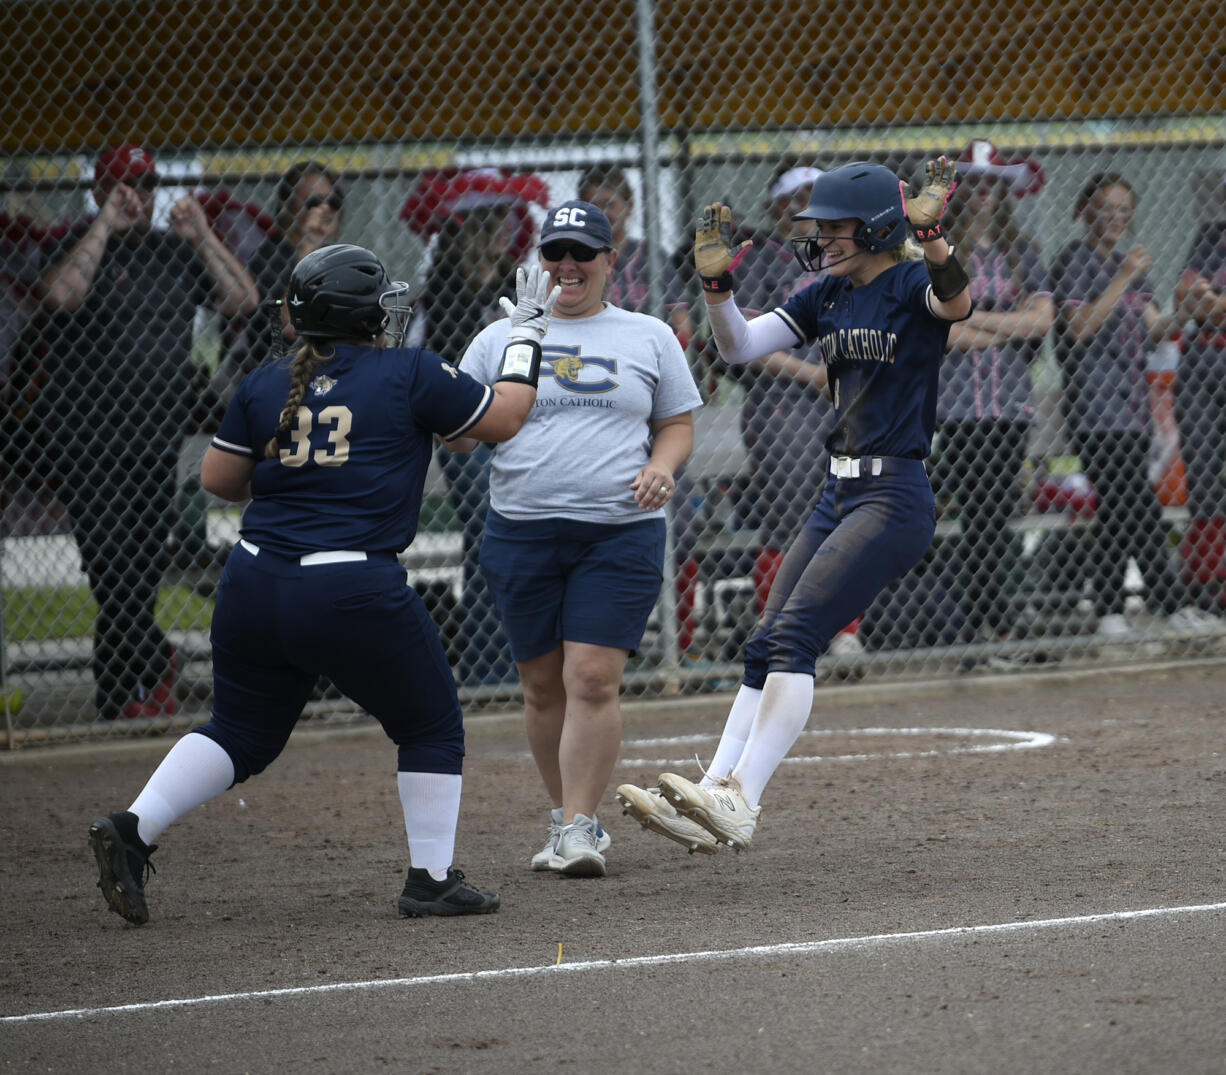 Kingsley Williams (right) celebrates her RBI single with teammate Kenzie Kuhnhausen (33) as coach Carrie Farrell looks on during Seton Catholic's 5-4 win over Riverside in the Class 1A state softball semifinals at Columbia Playfields in Richland on Friday, May 24, 2024.